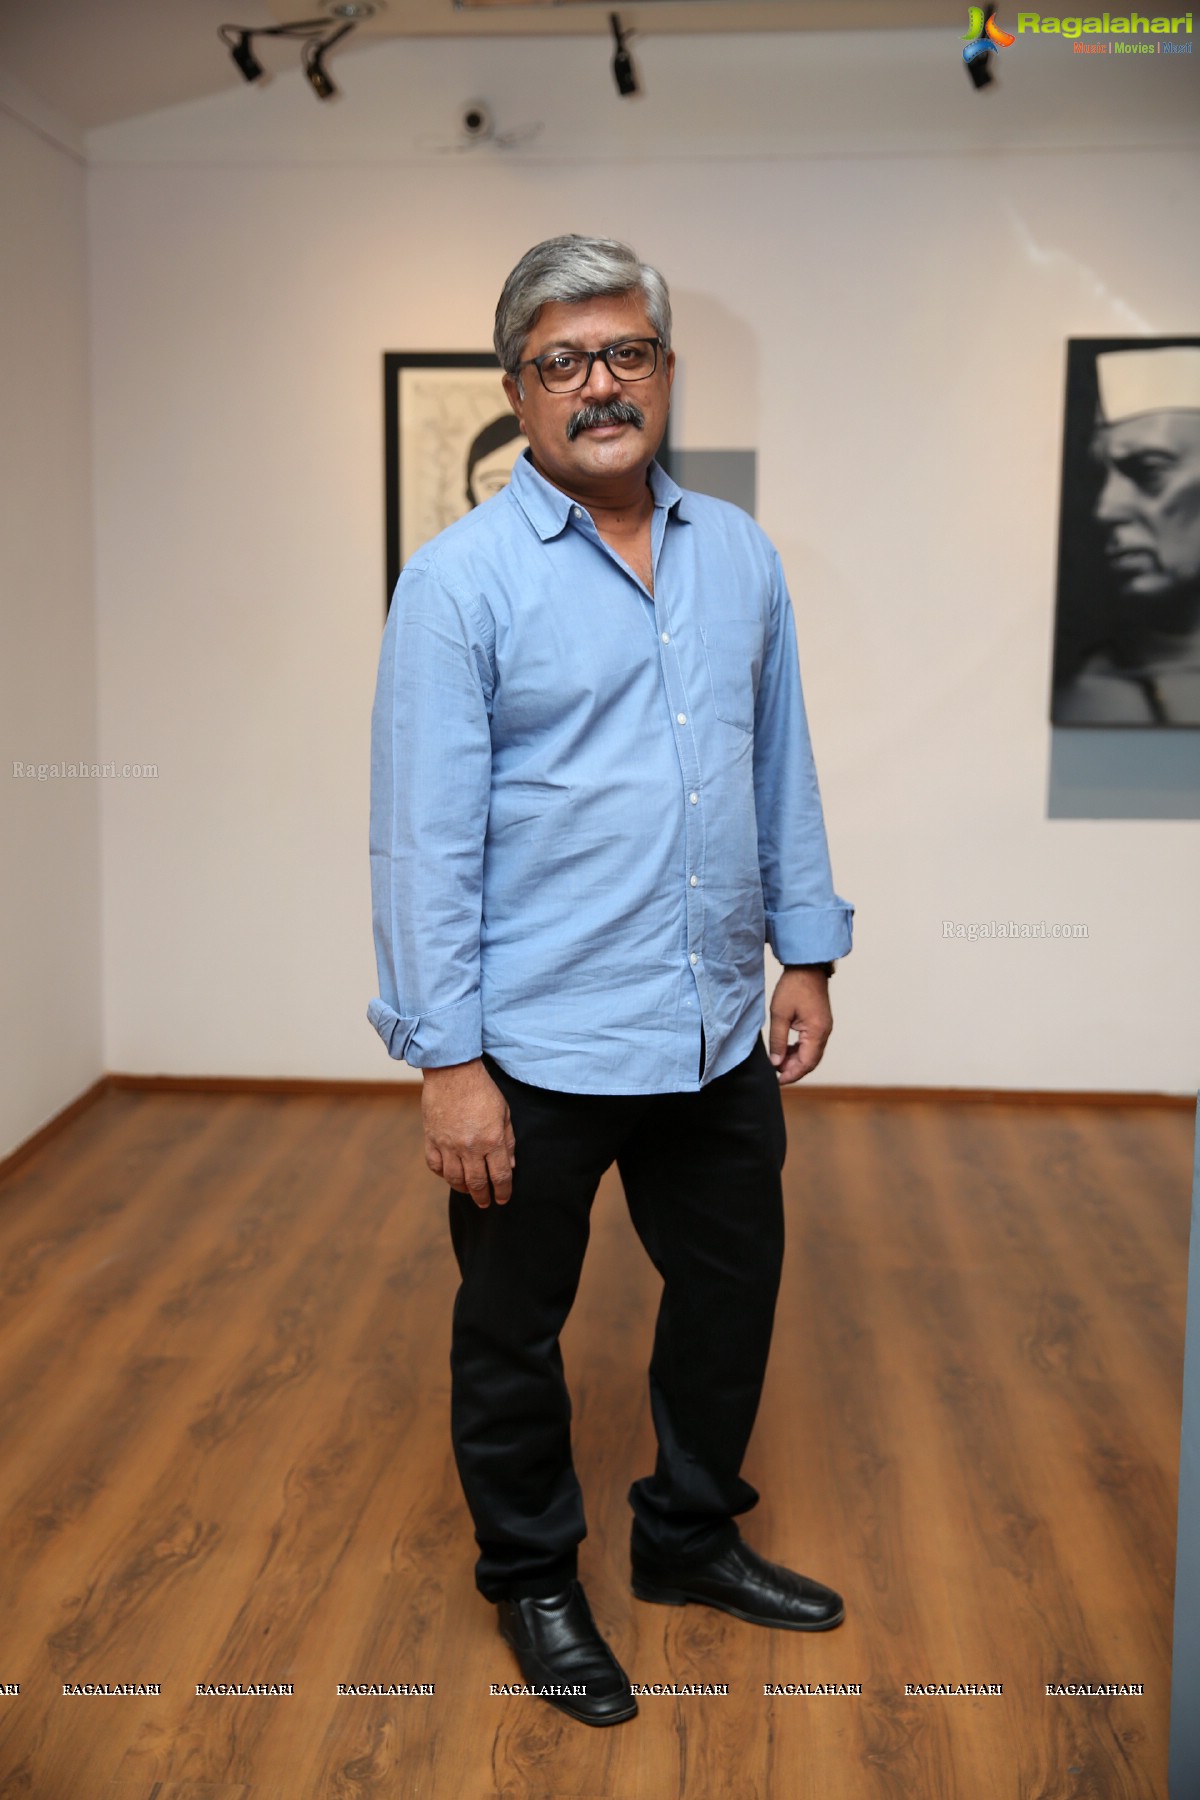 The Theatre of Absorption - An Art Exhibition at Kalakriti Art Gallery